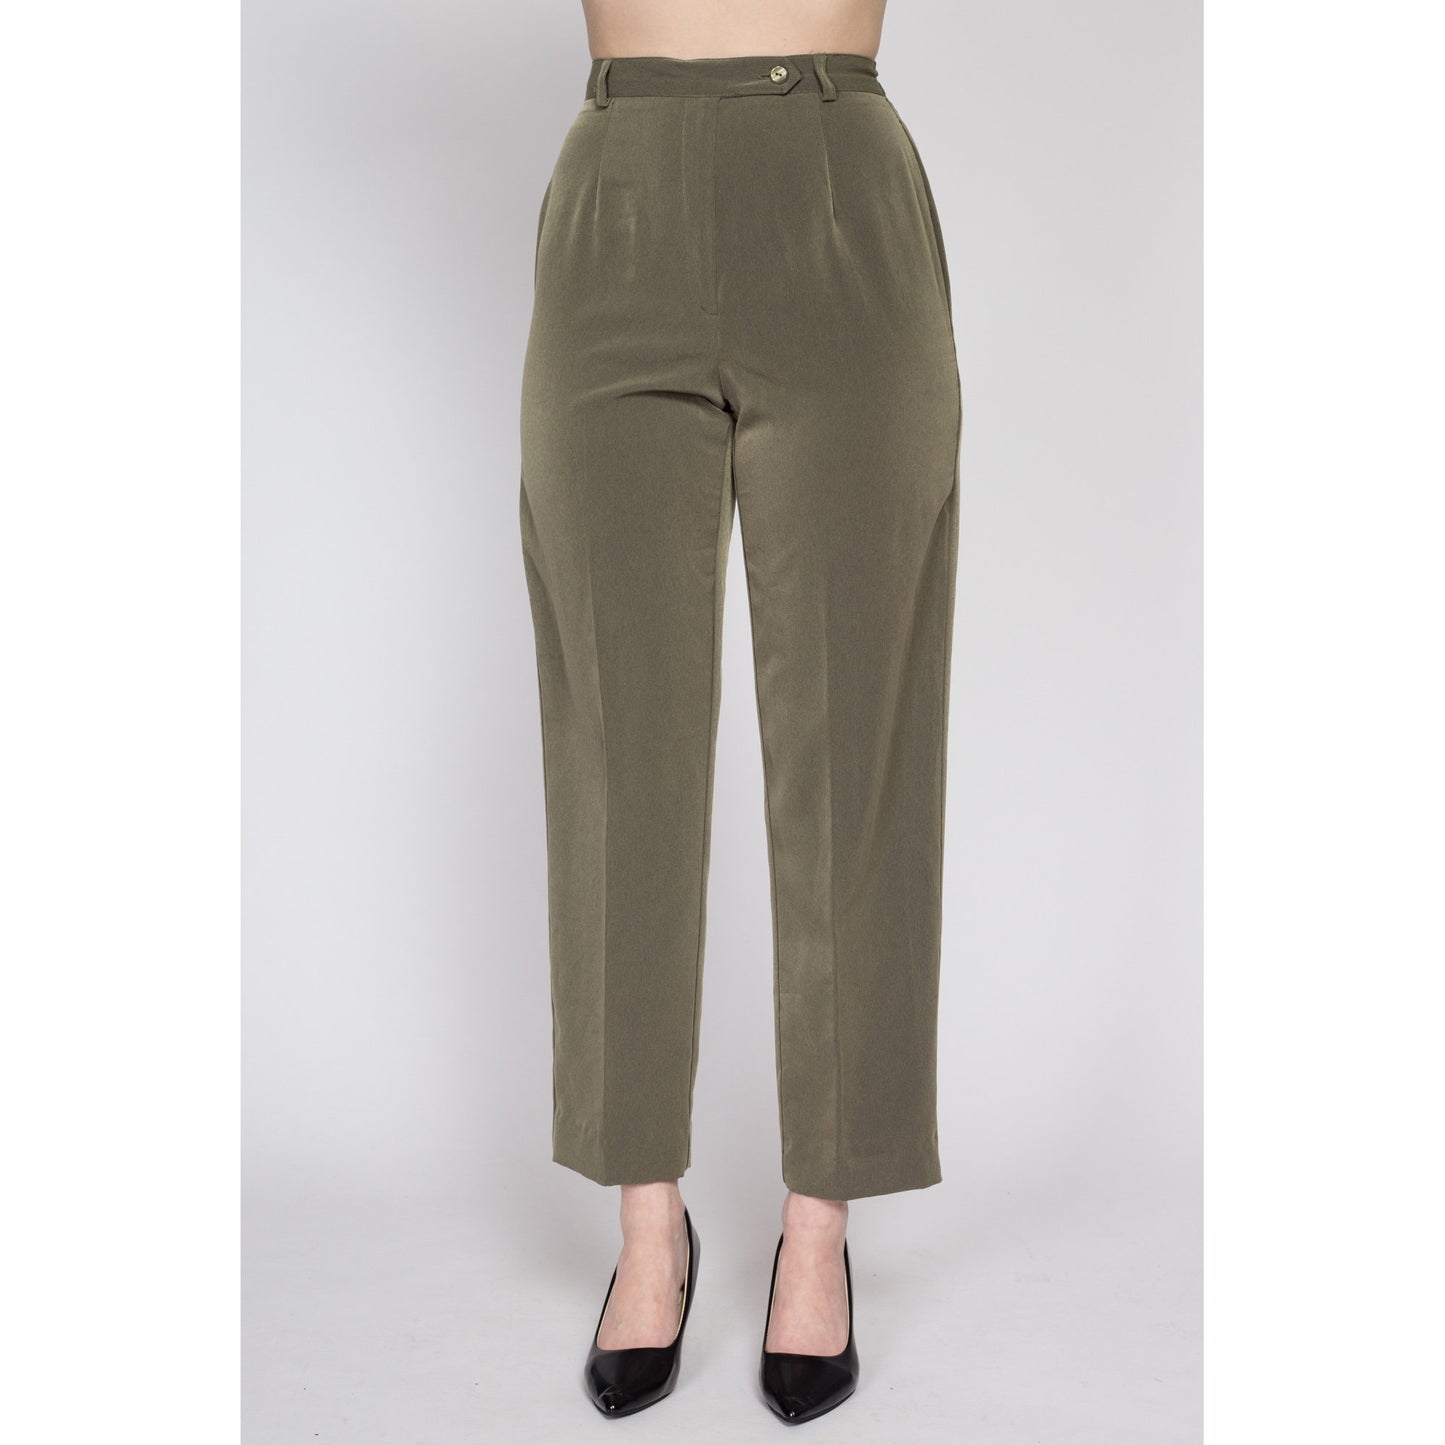 XS 90s Shiny Olive Green High Waisted Trousers 25" | Vintage Tapered Leg Curvy Fit Ankle Pants